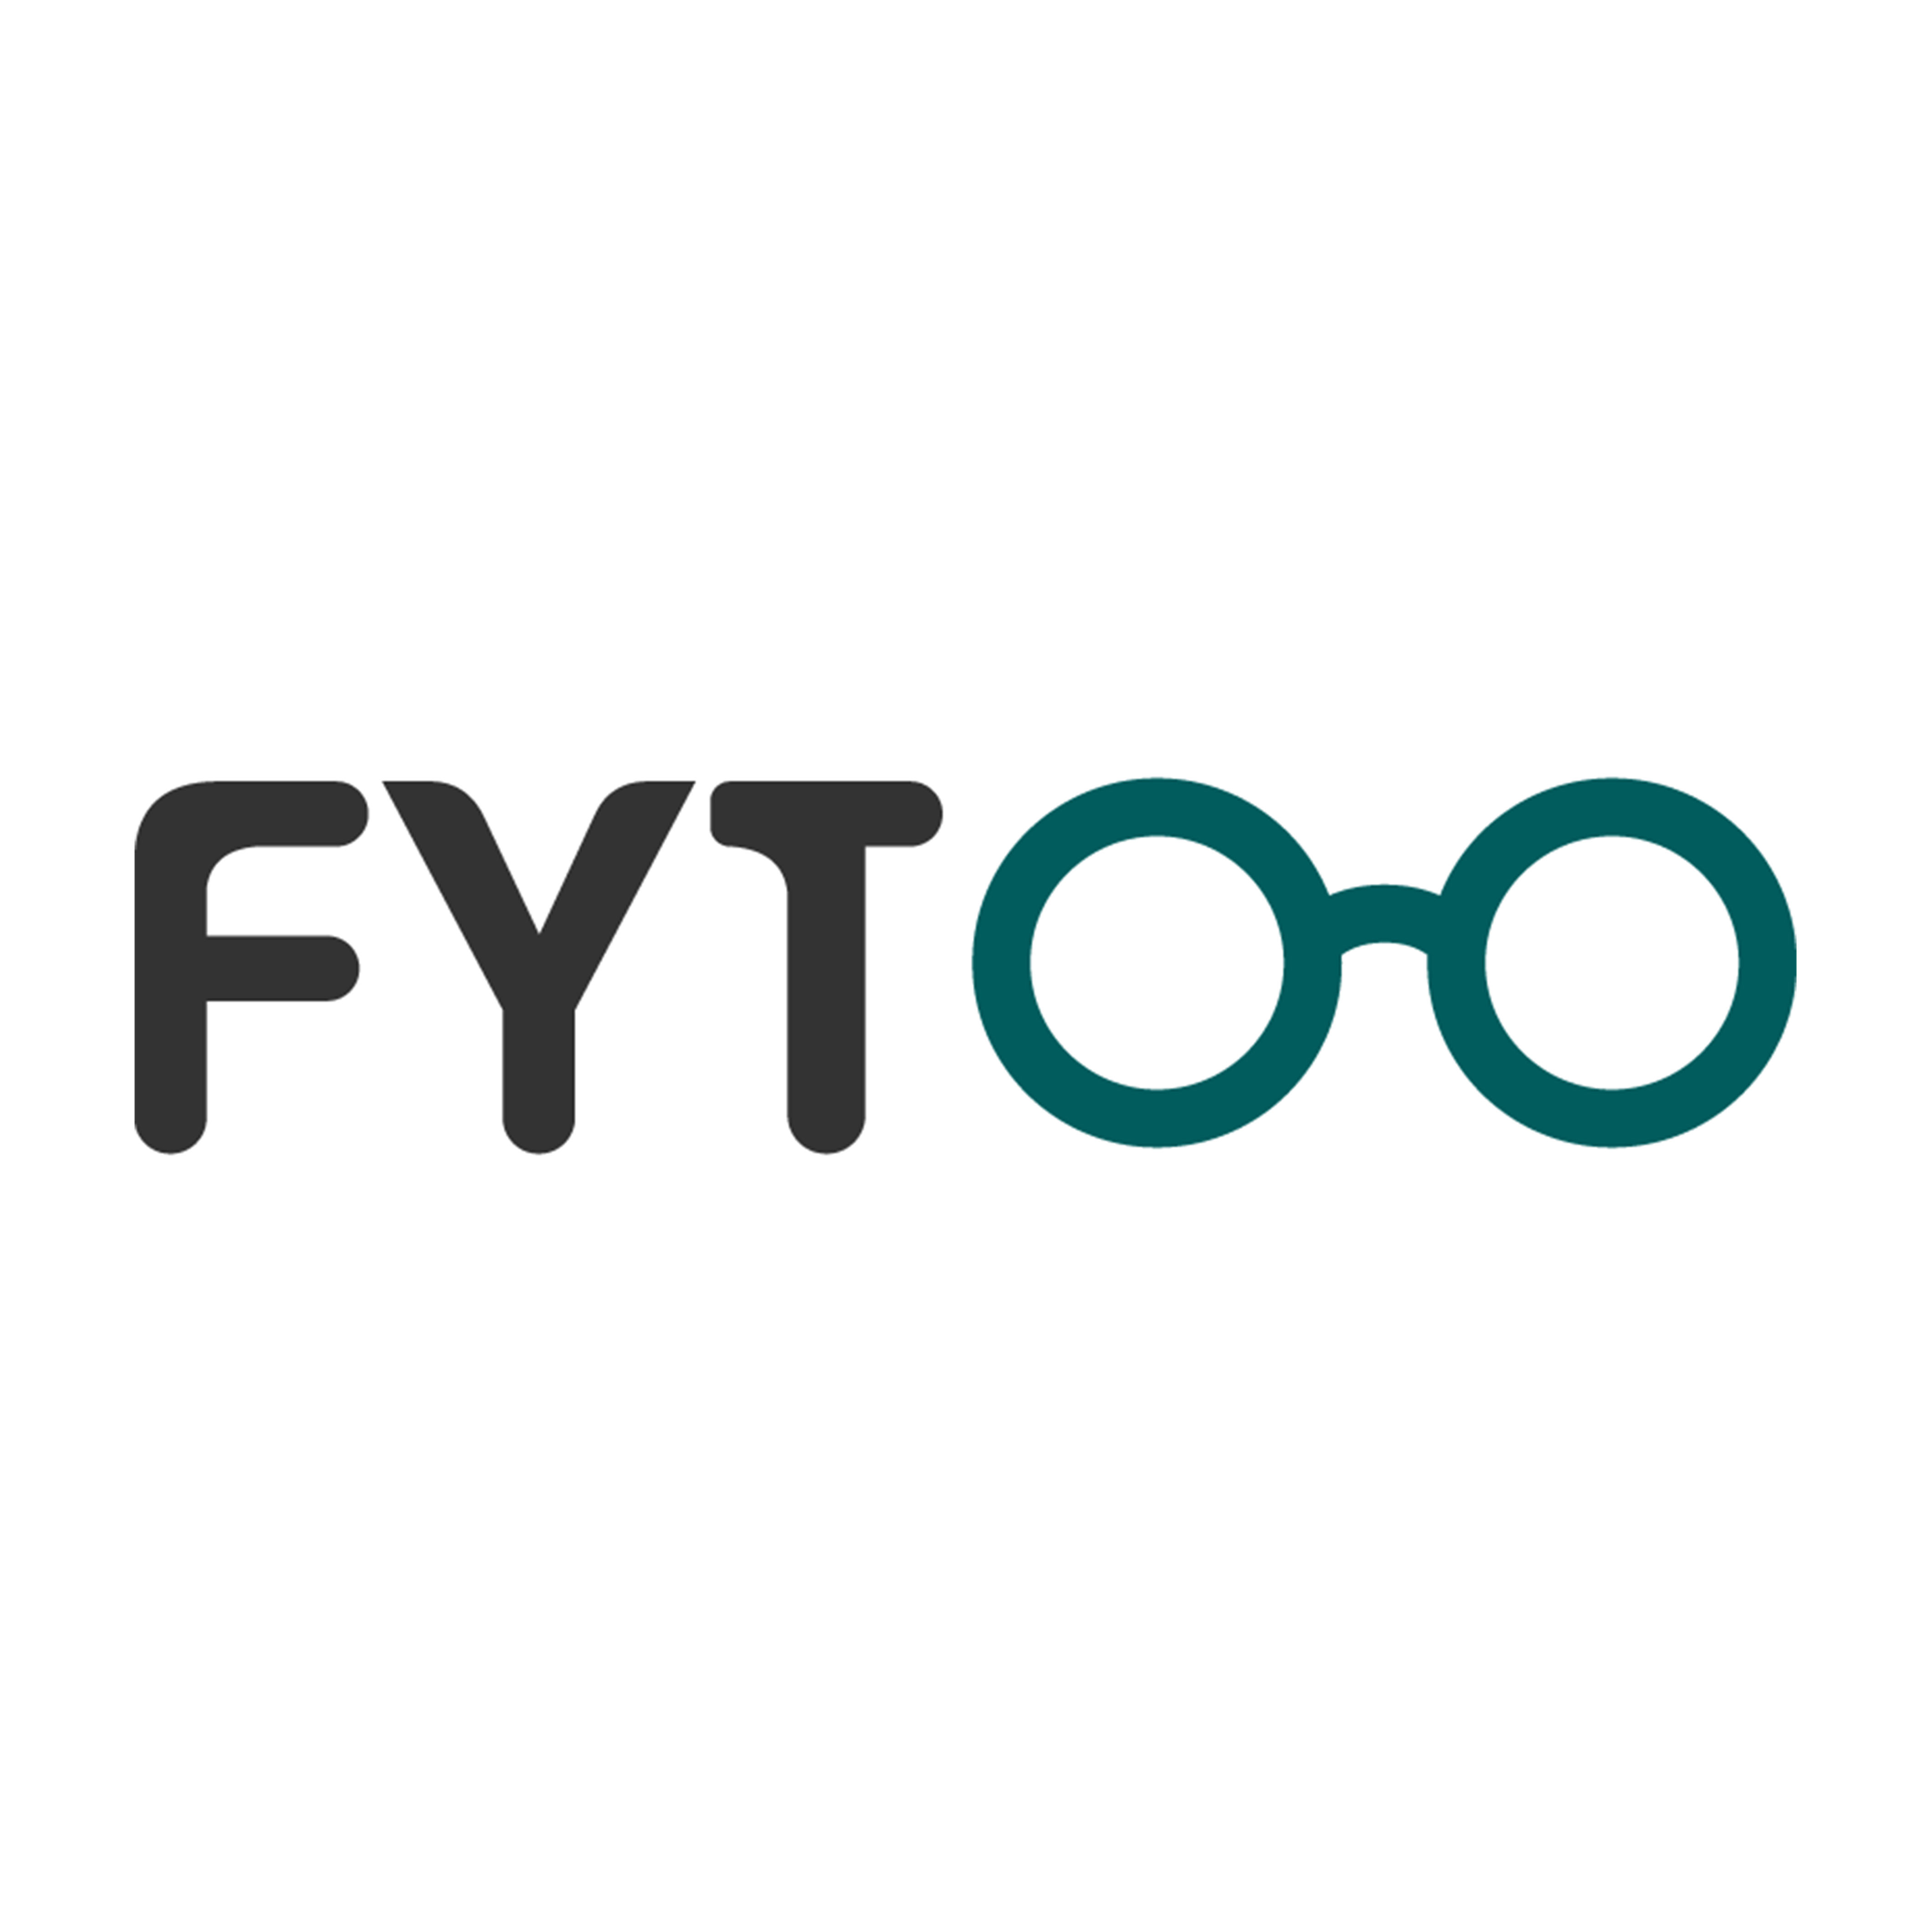 FYTOO promo codes